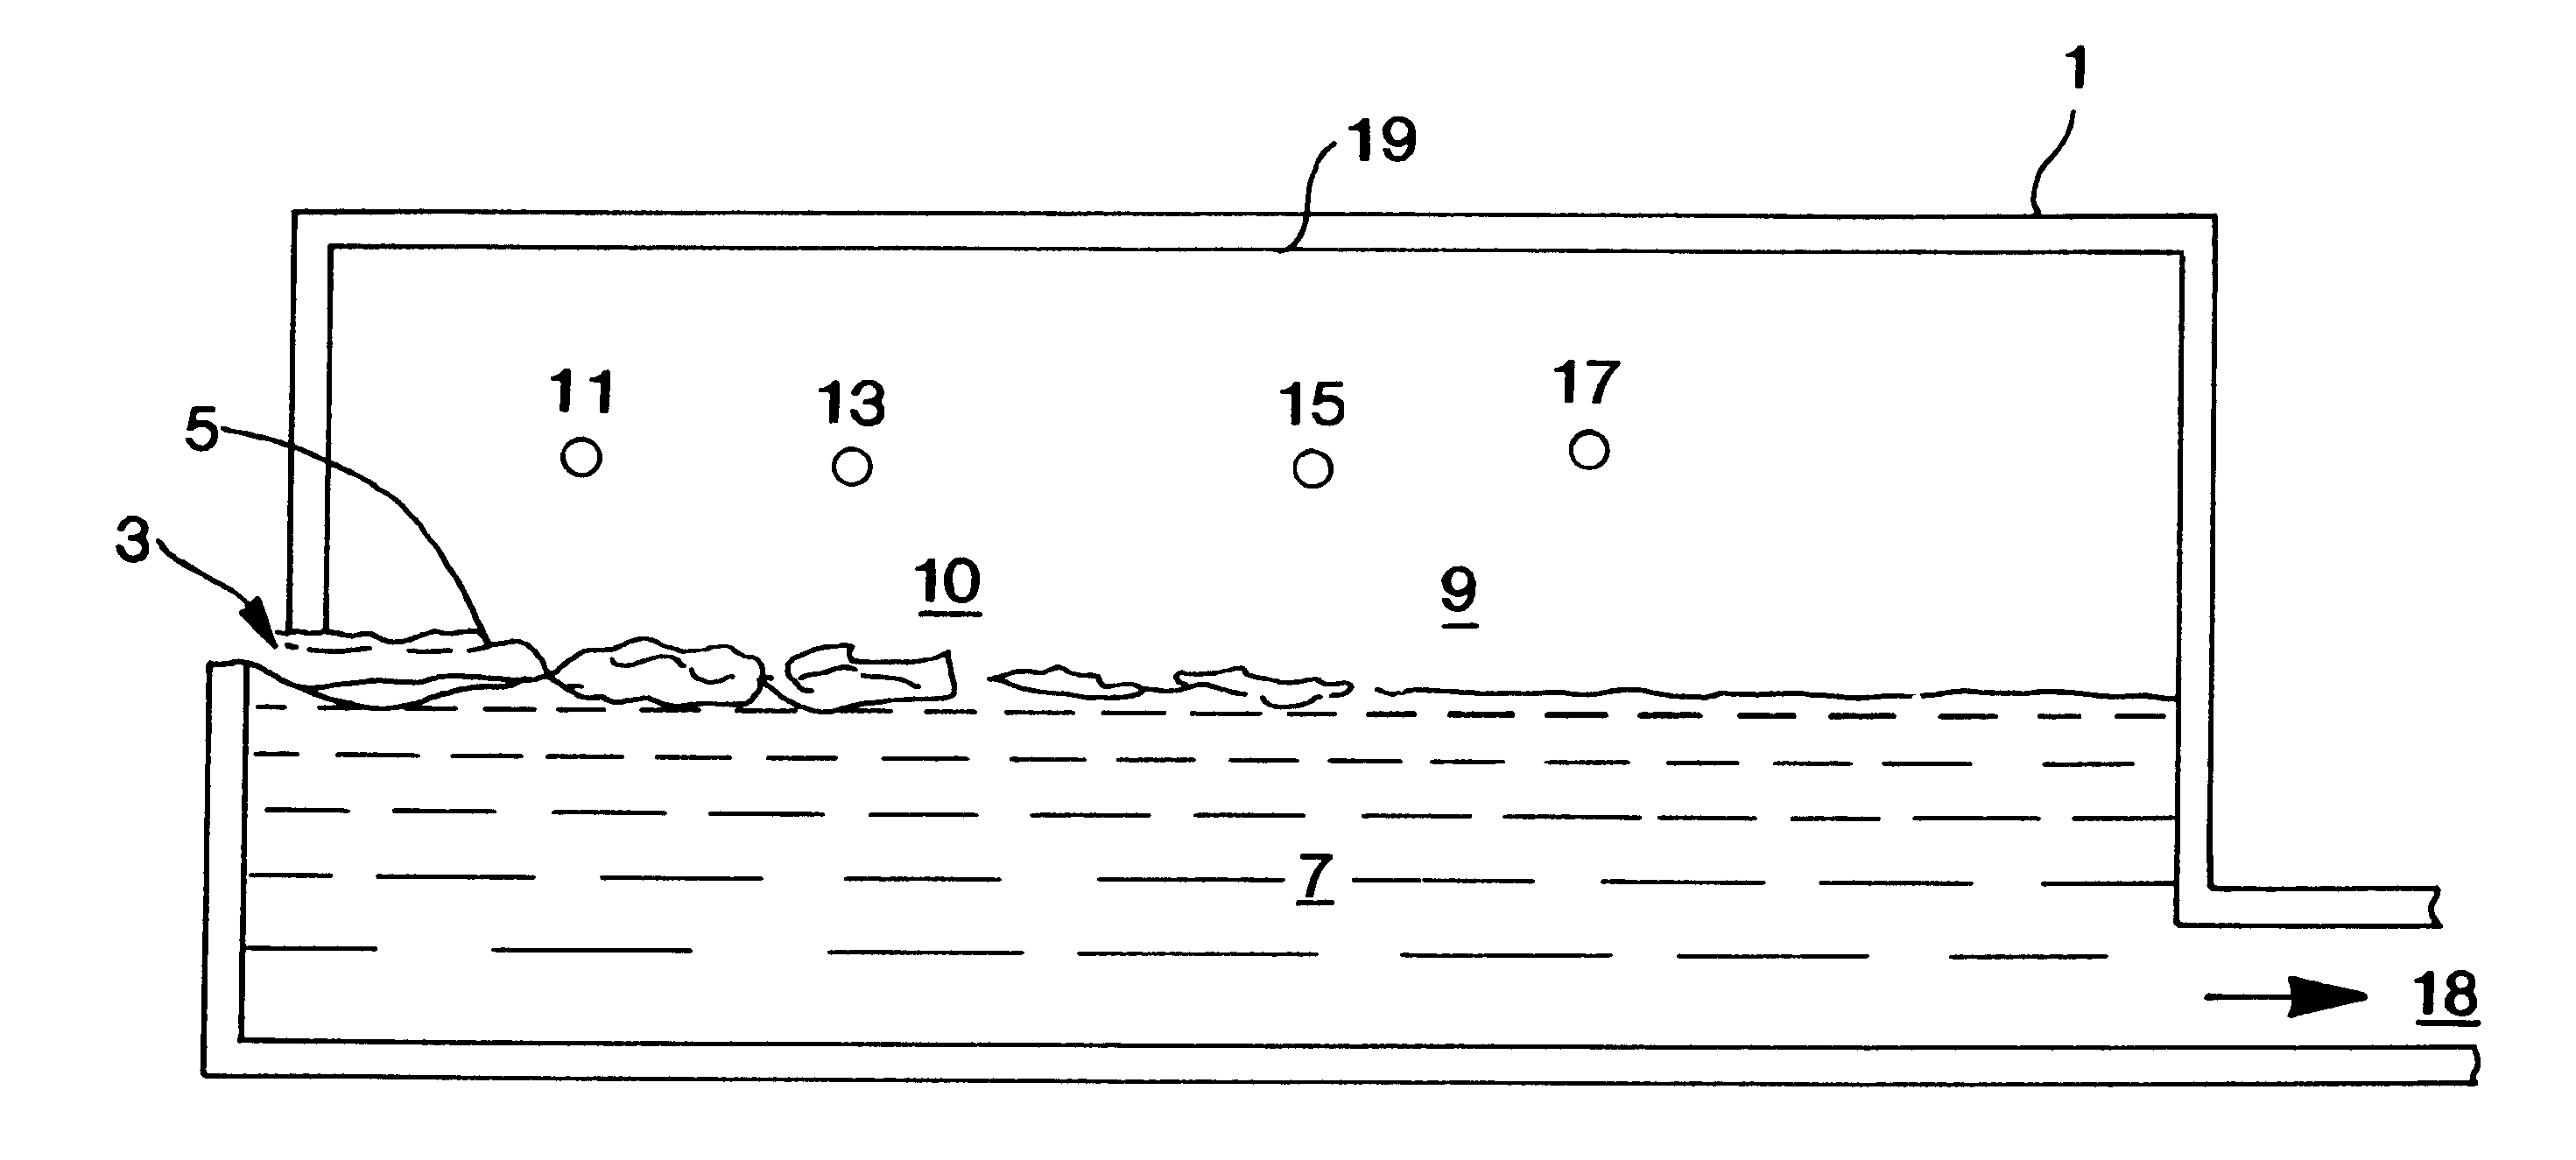 Glass melting process and apparatus with reduced emissions and refractory corrosion